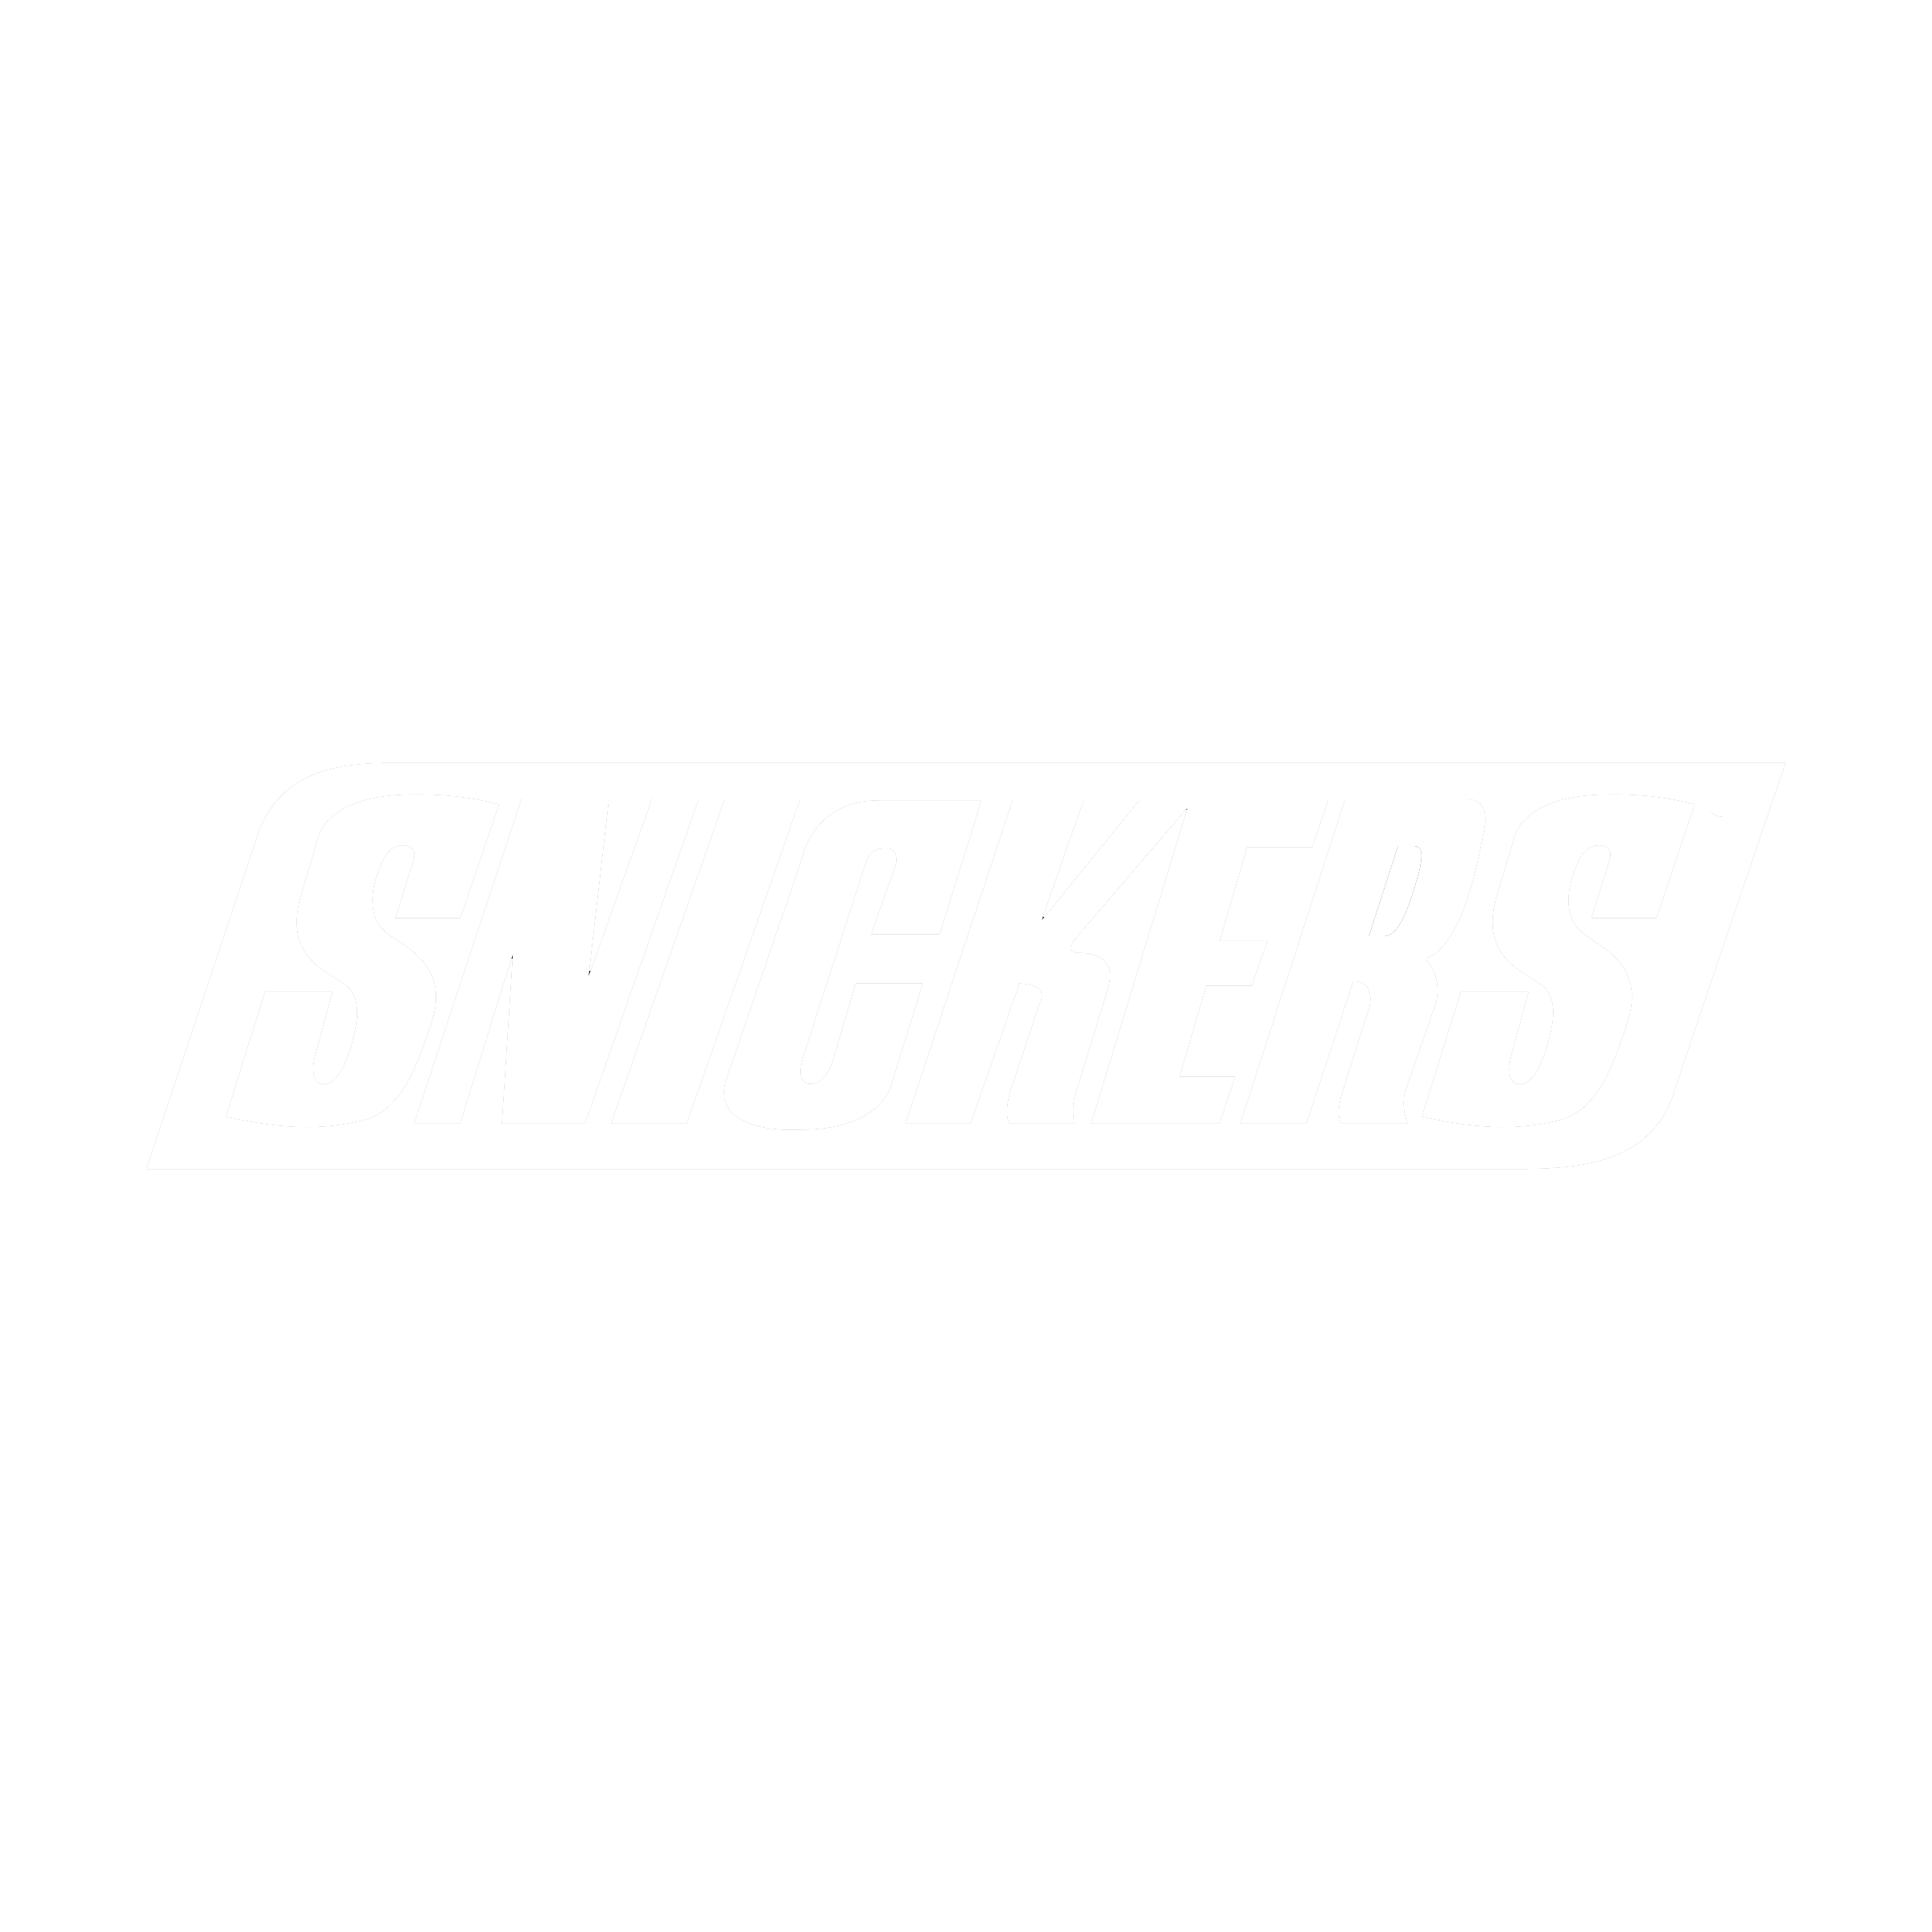 snickers-3-logo-png-transparent copy.png